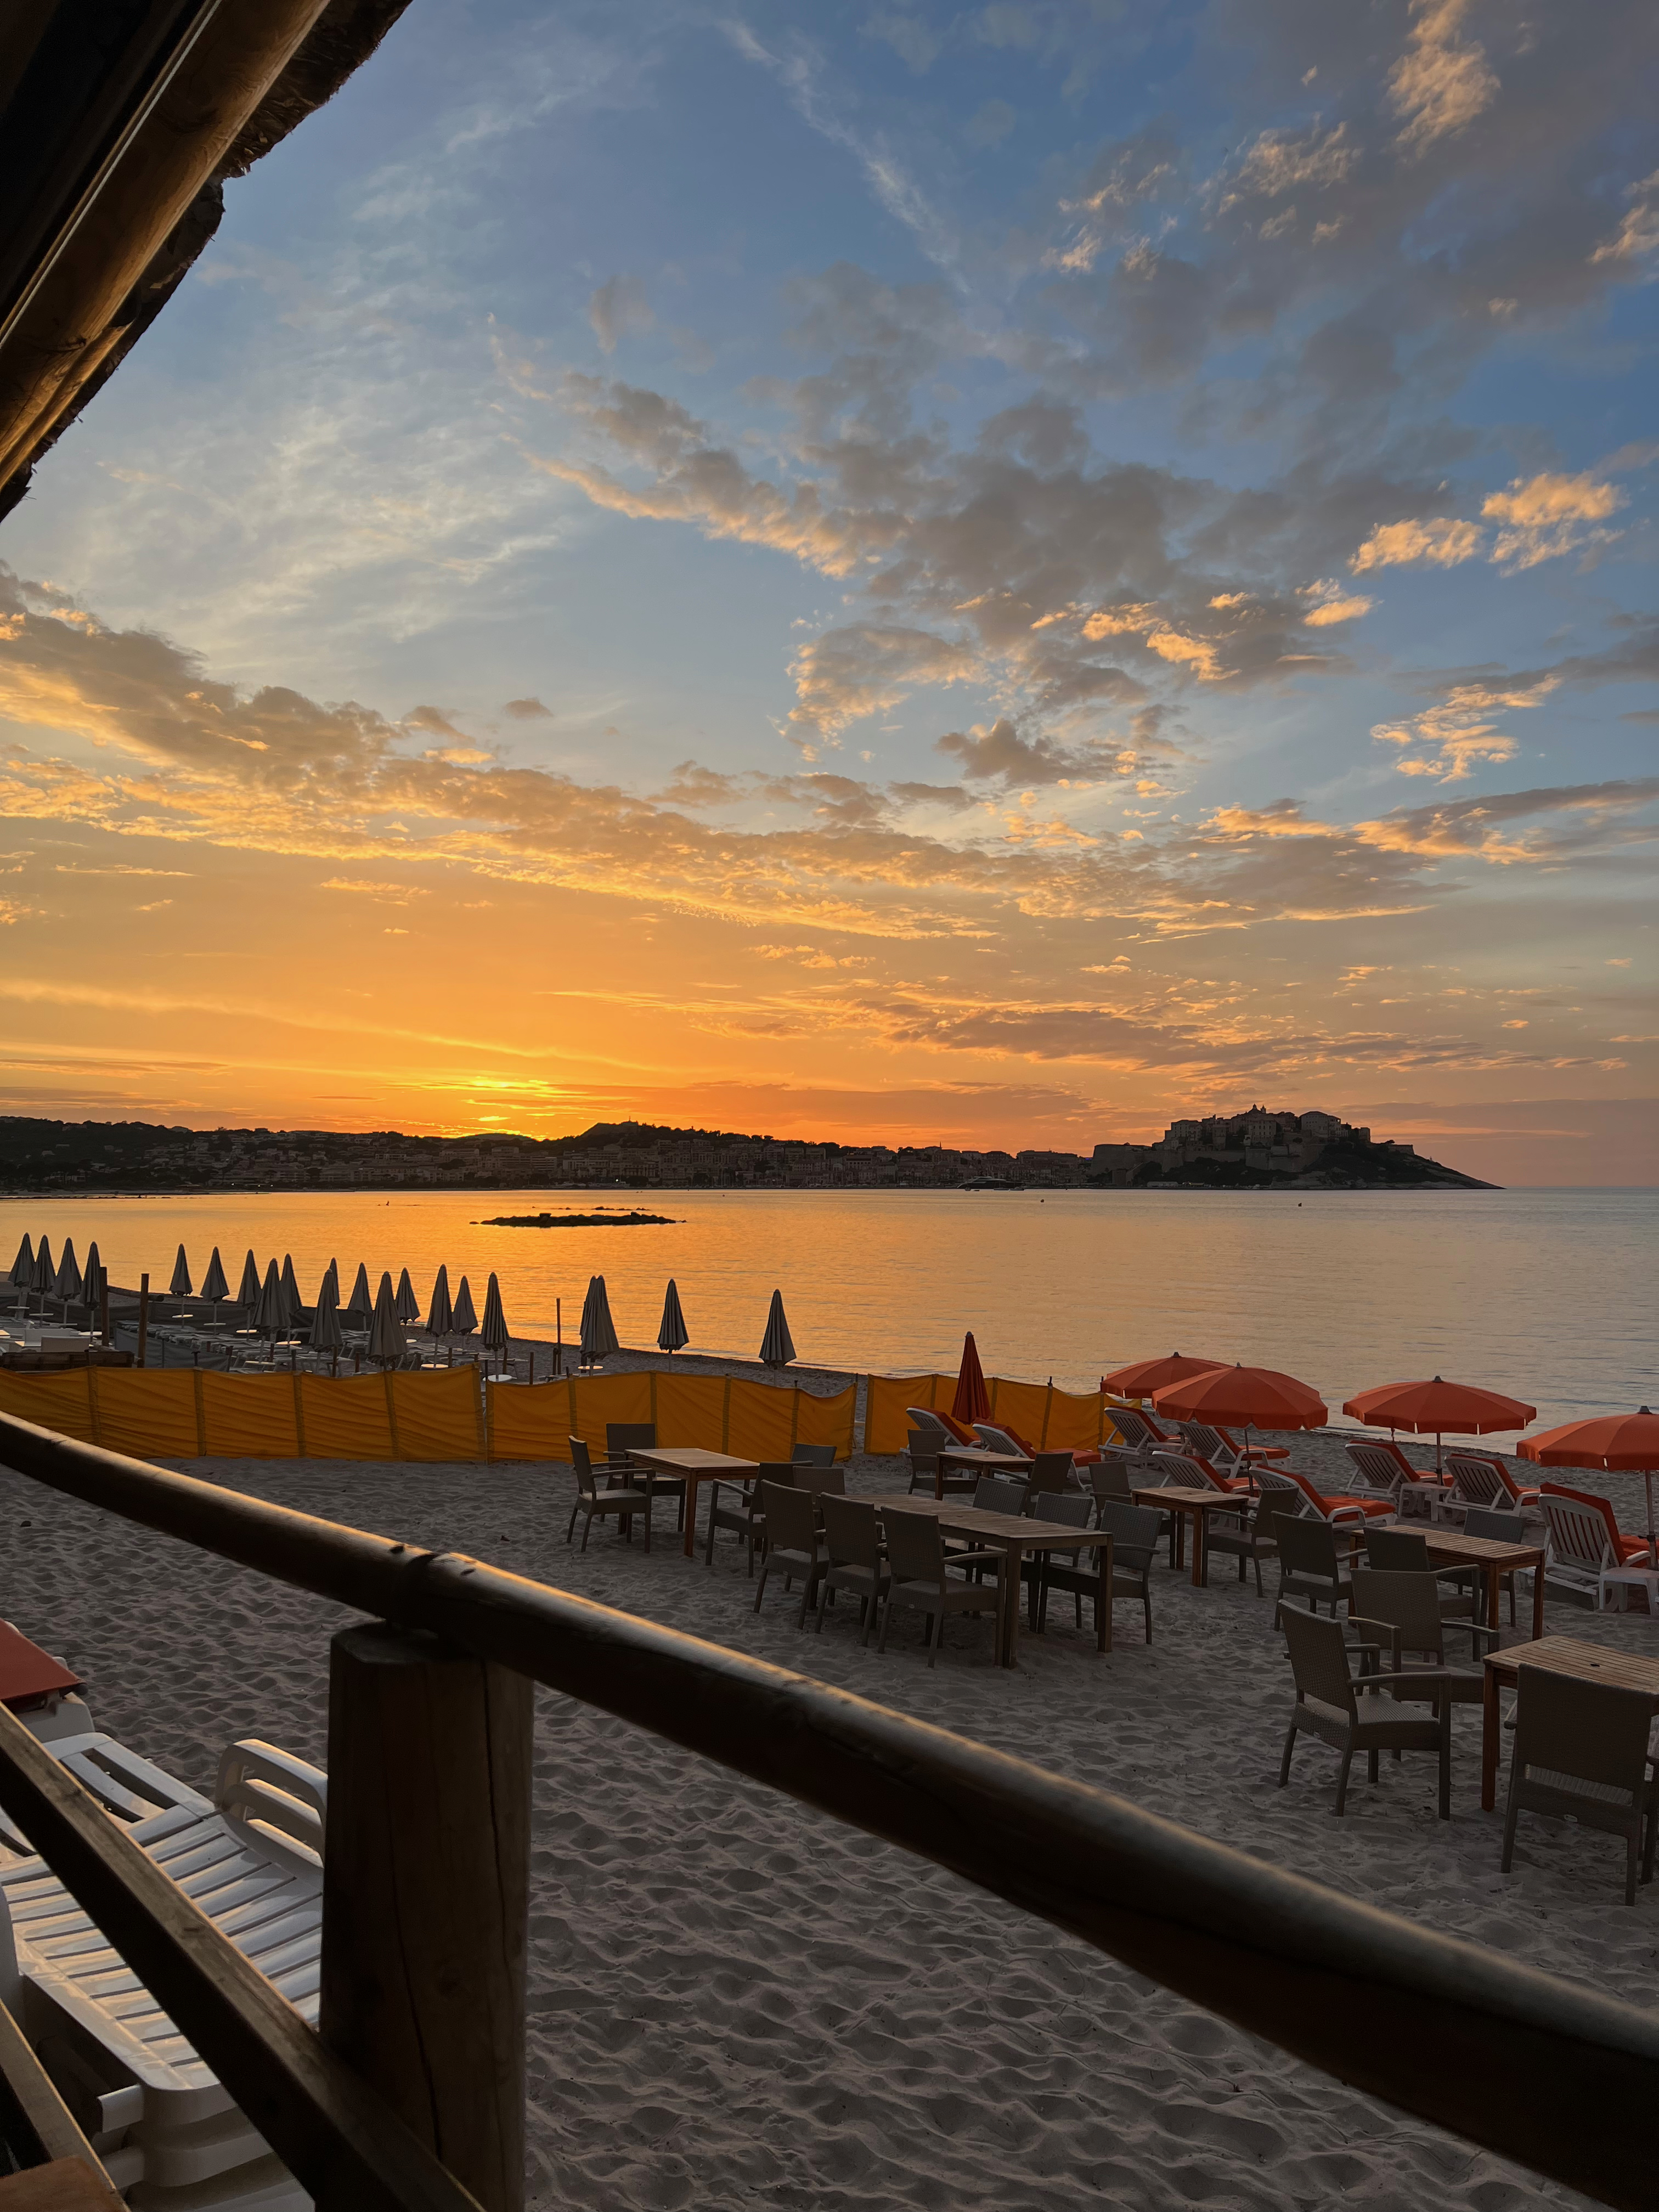 Sunset at the restaurant "Le Belgodere"